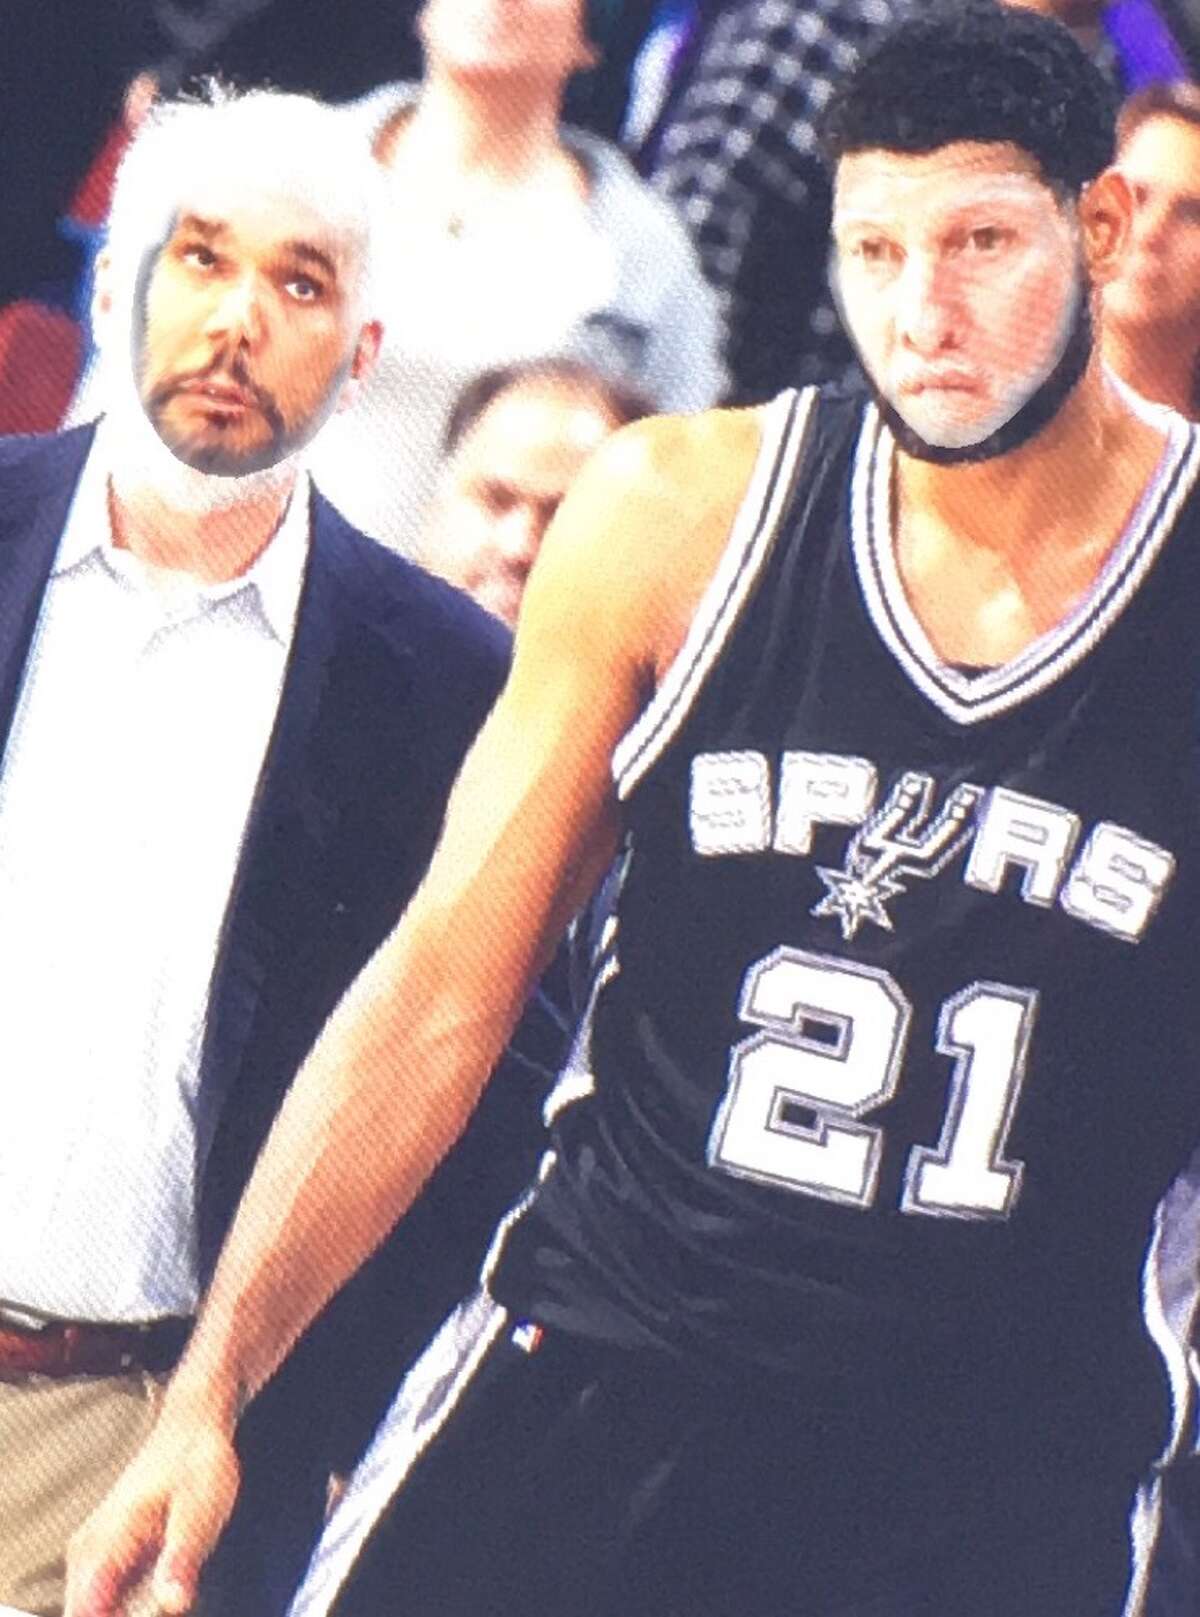 Face swap: Tim Duncan and Gregg Popovich